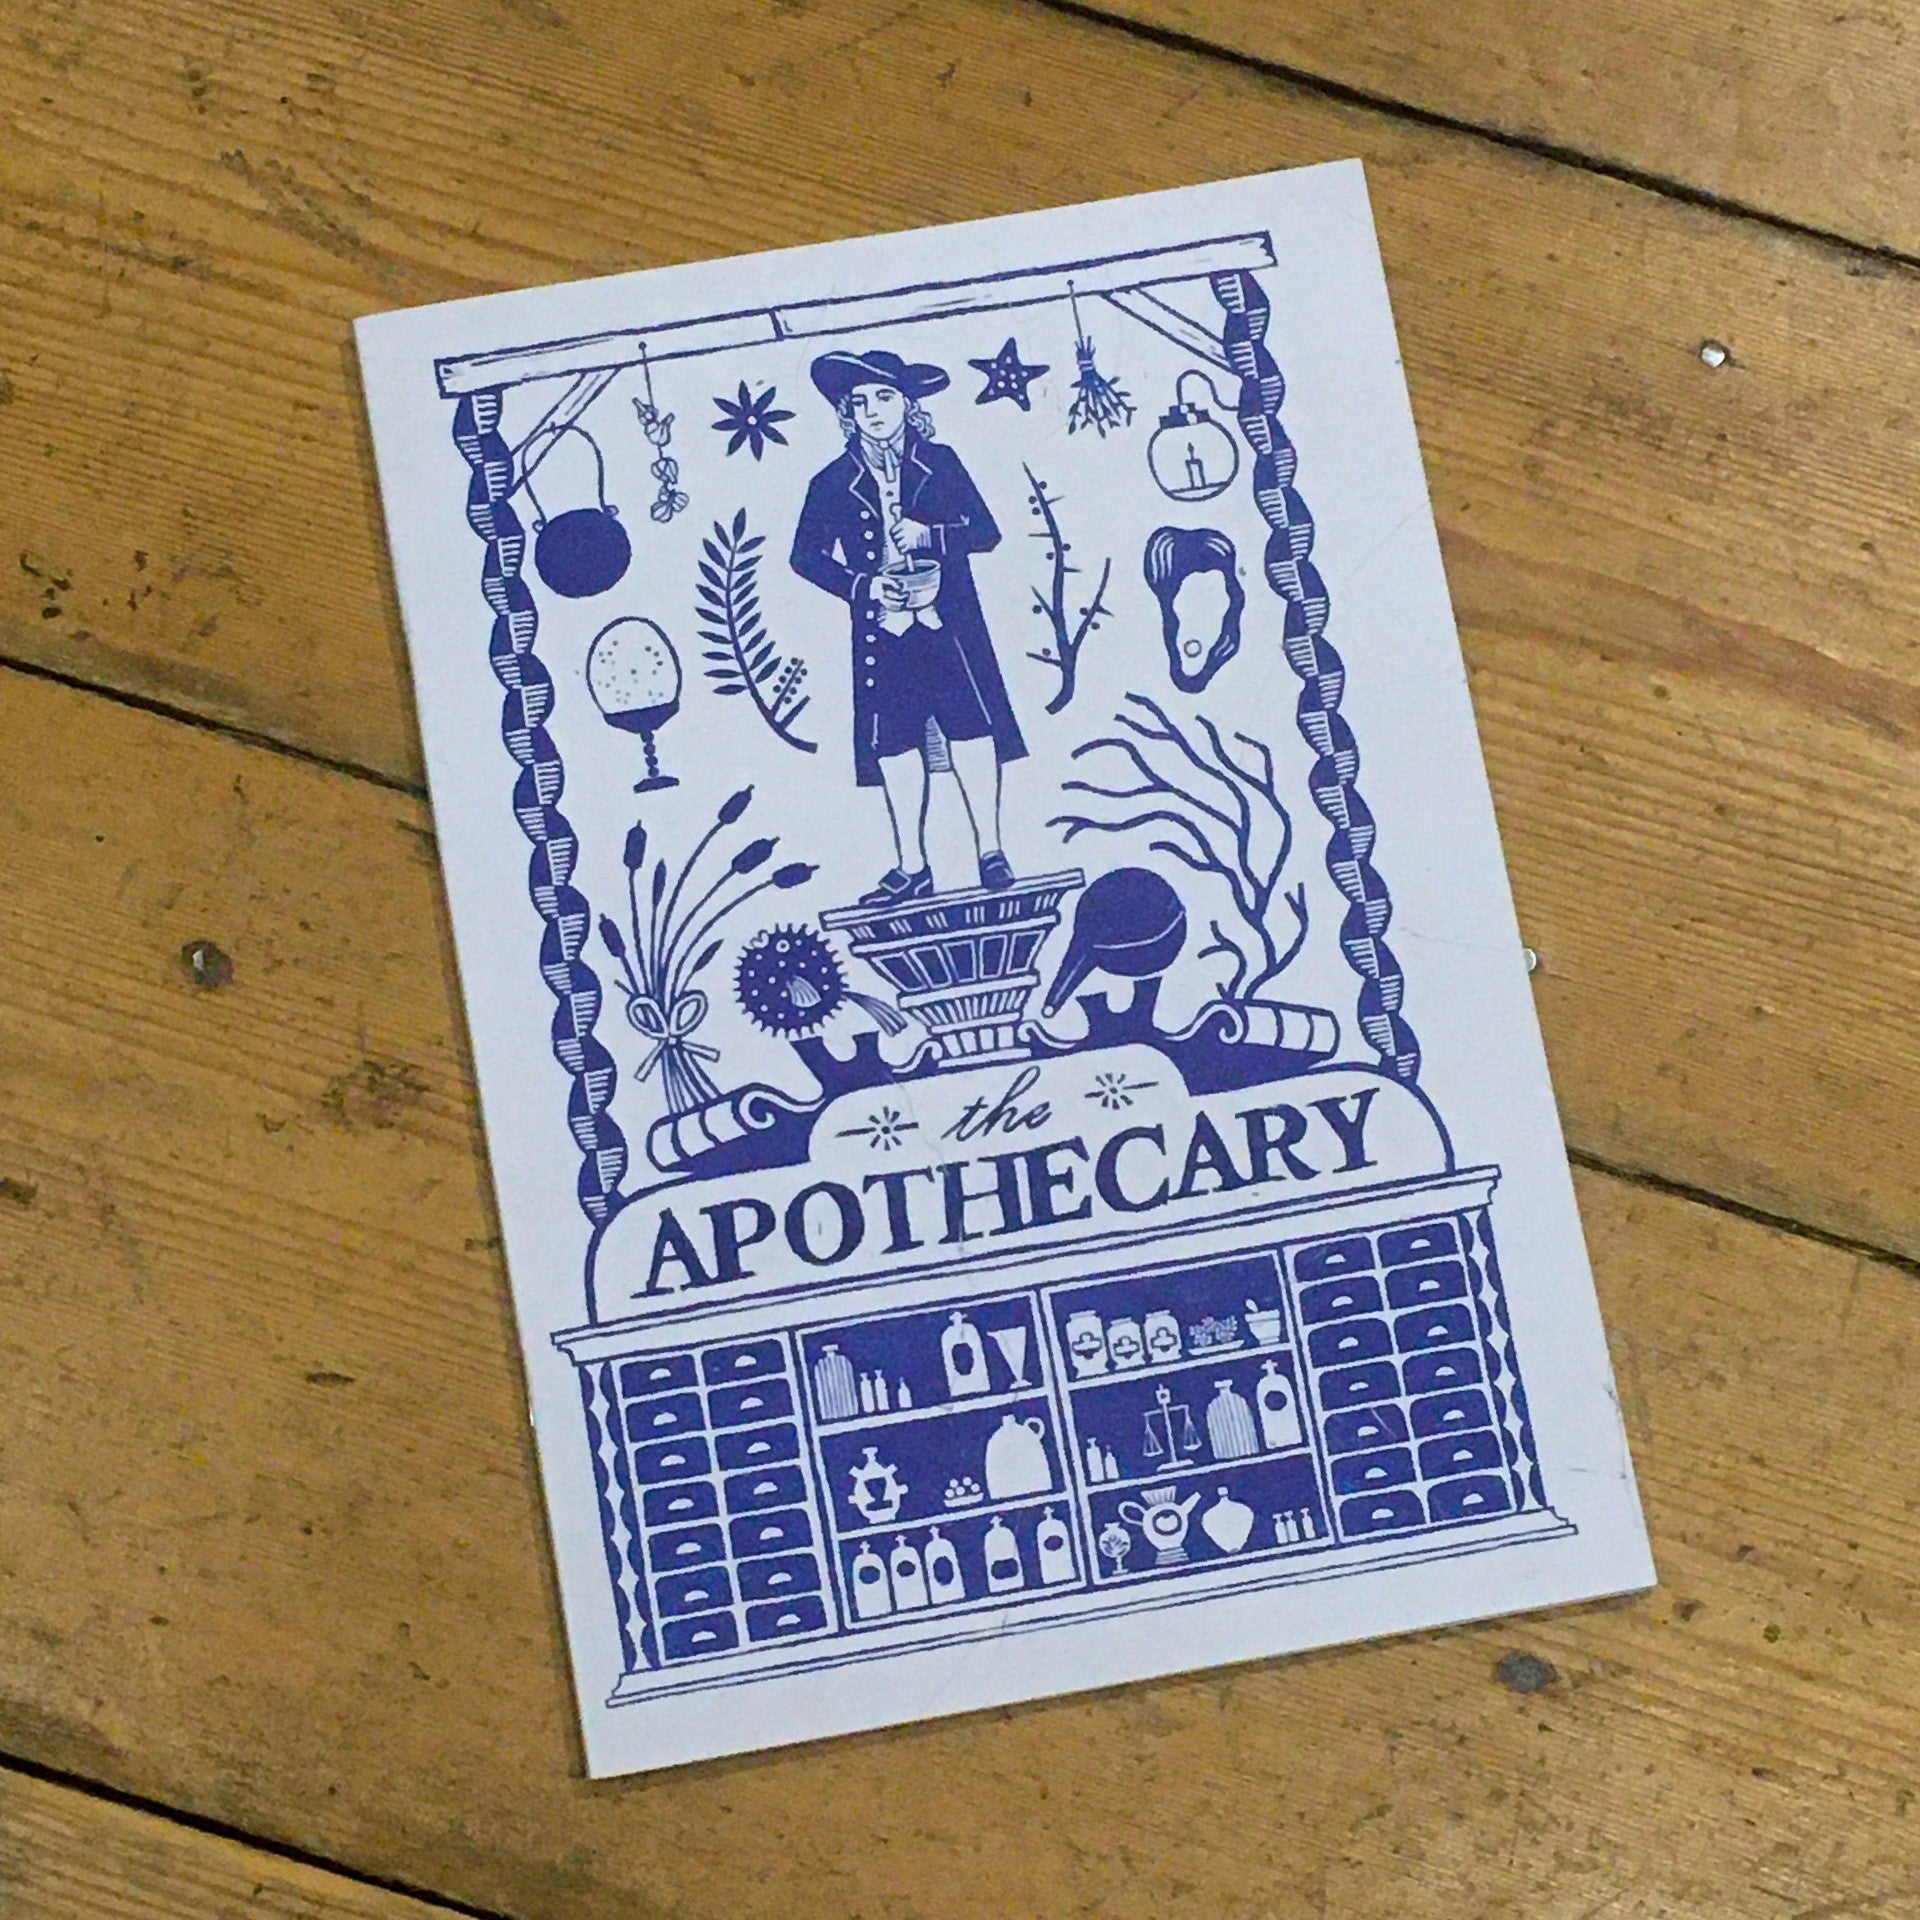 A5 notebook with blue and white apothecary design on the cover.